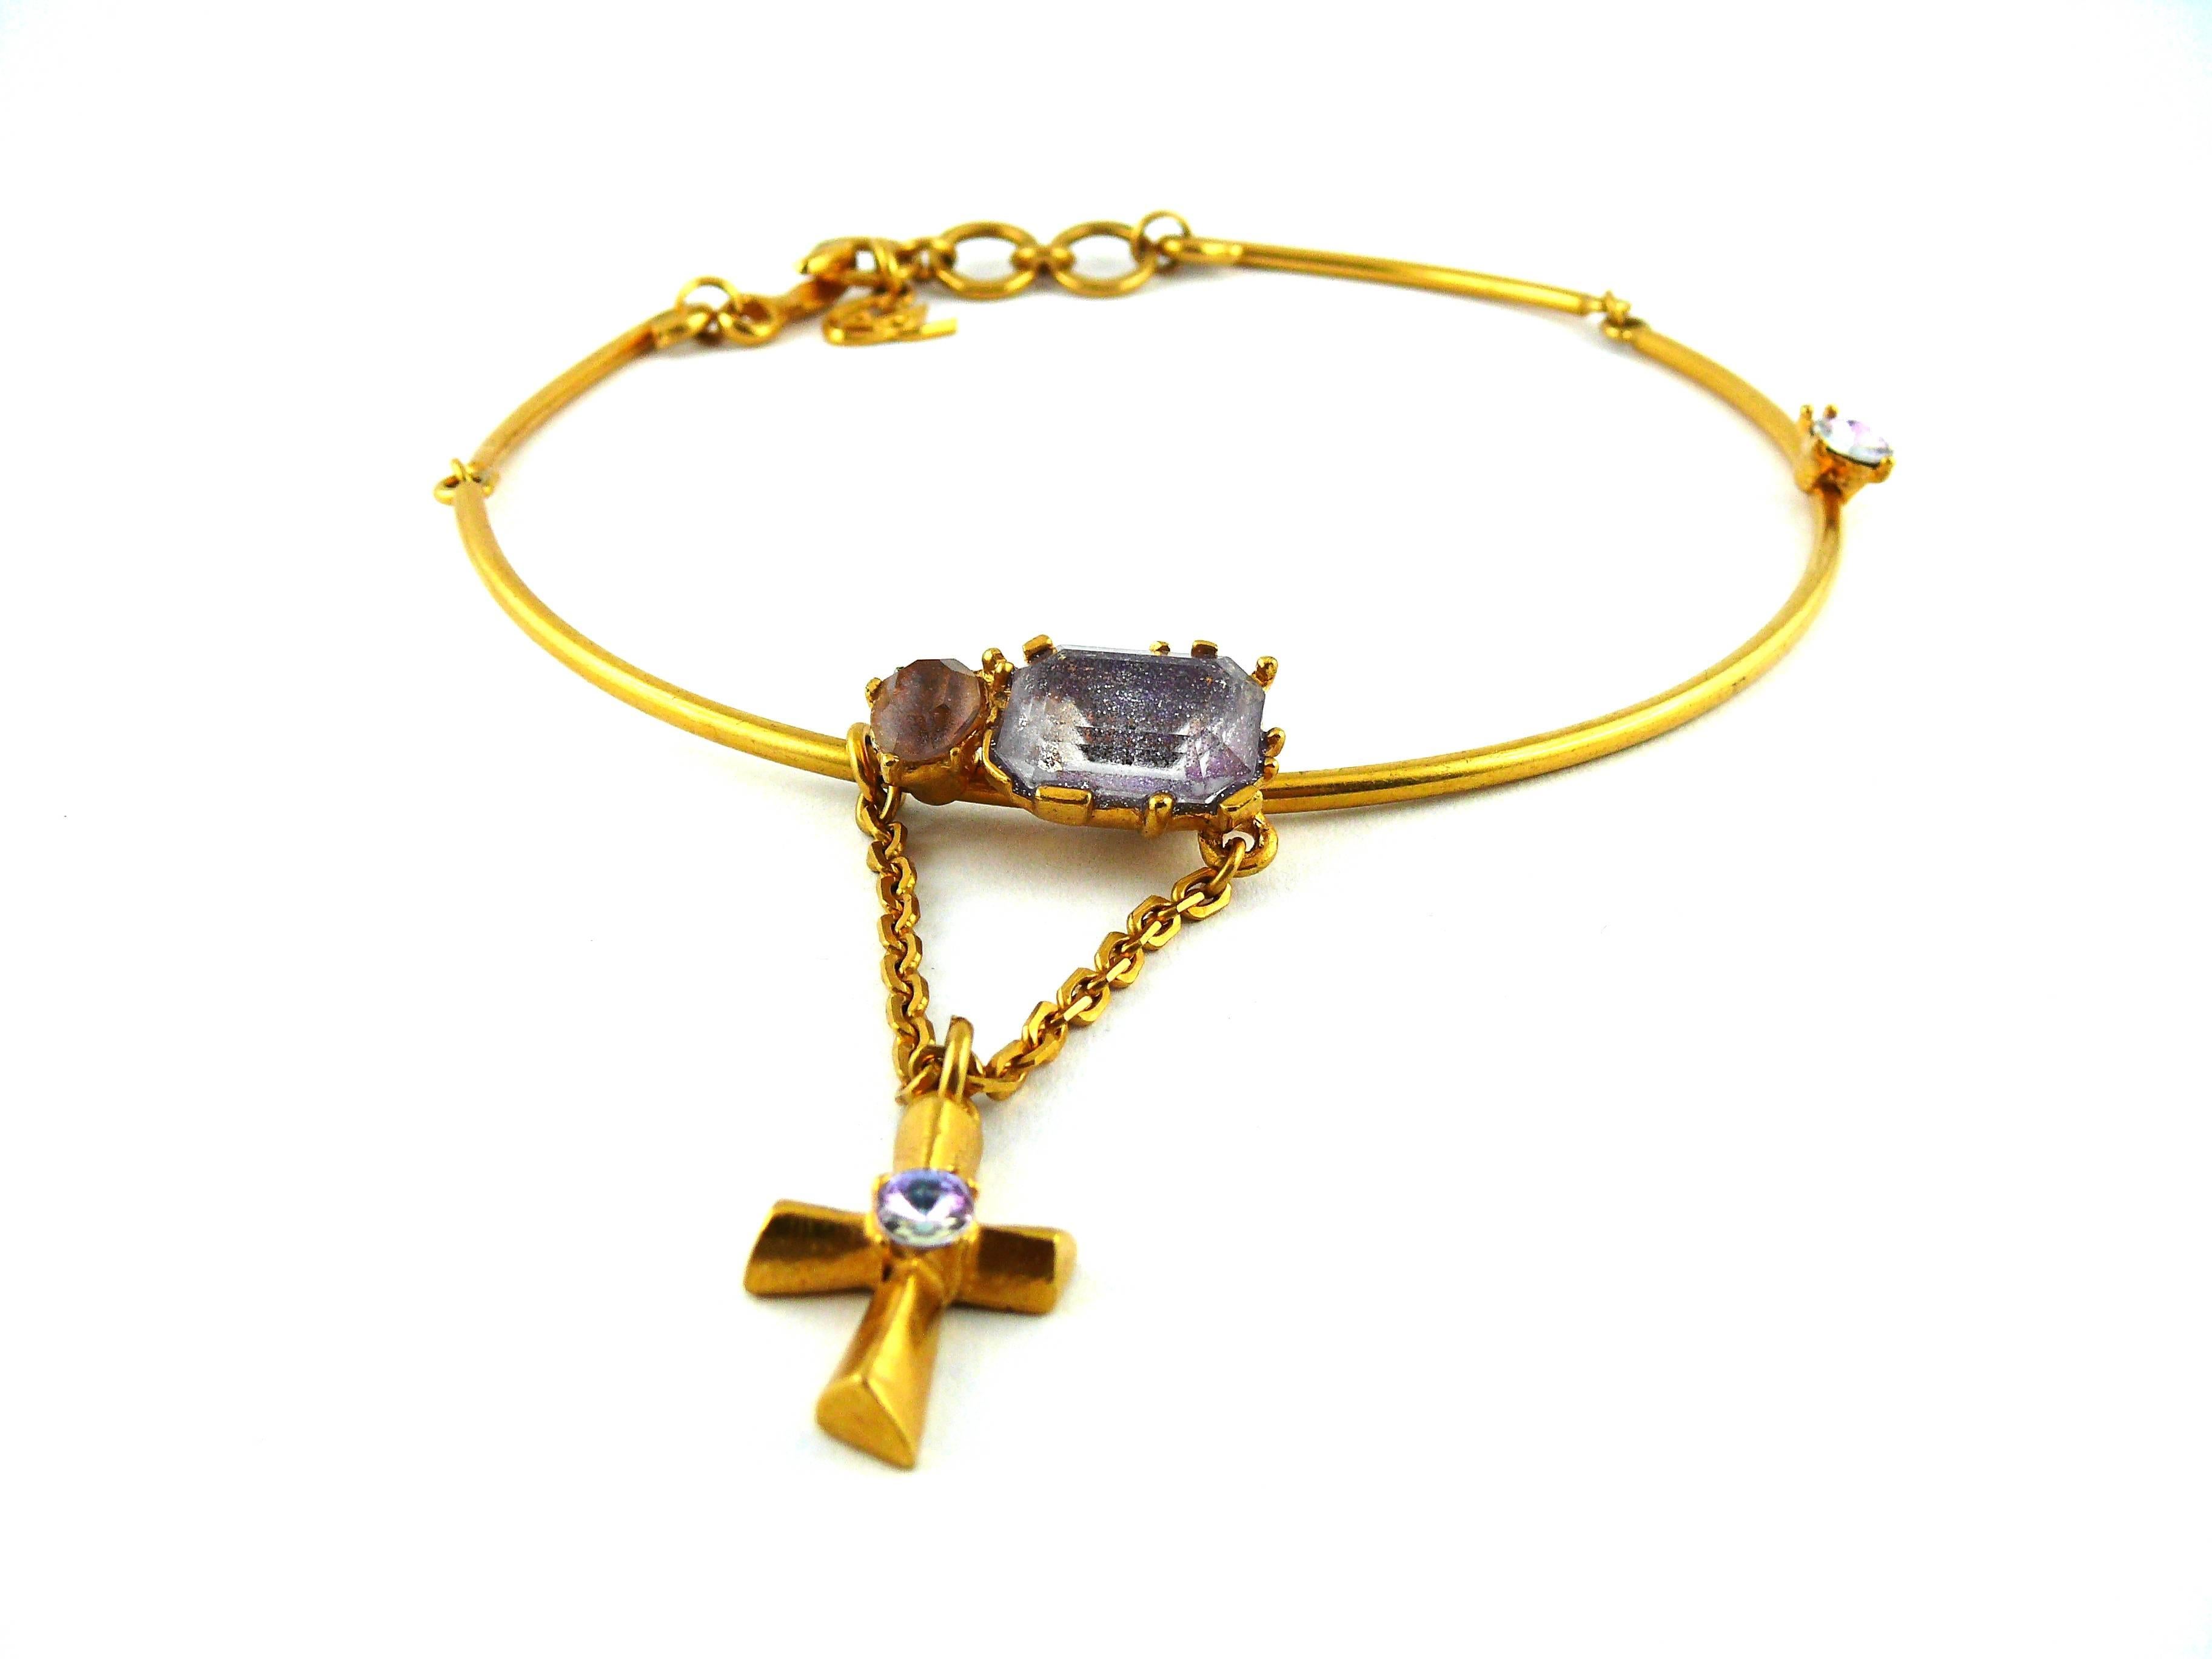 Women's Christian Lacroix Vintage Jewelled Chocker Necklace with Cross Charm